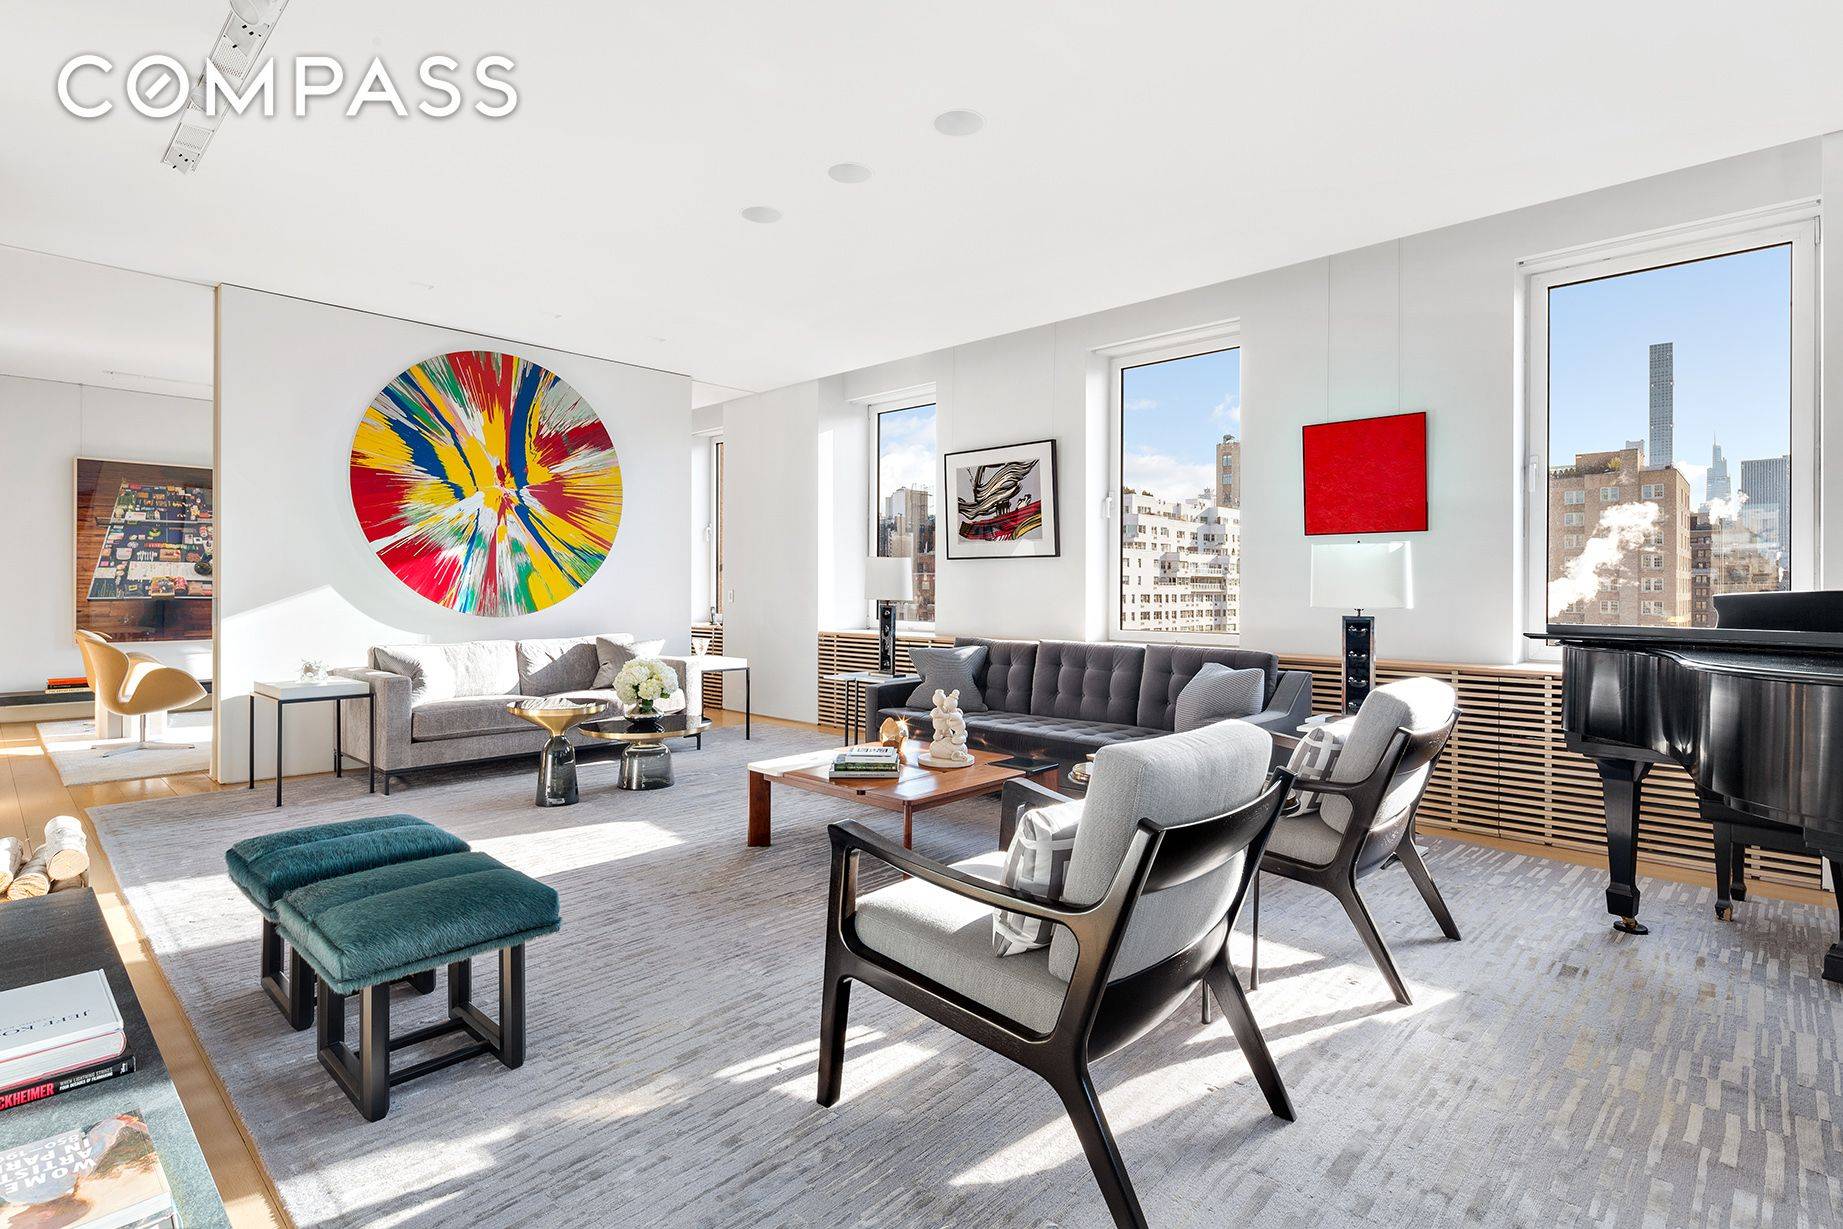 Open and airy, this full floor apartment offers dazzling views of Central Park and the iconic New York City skyline, including the Empire State Building to the south and pretty, ...